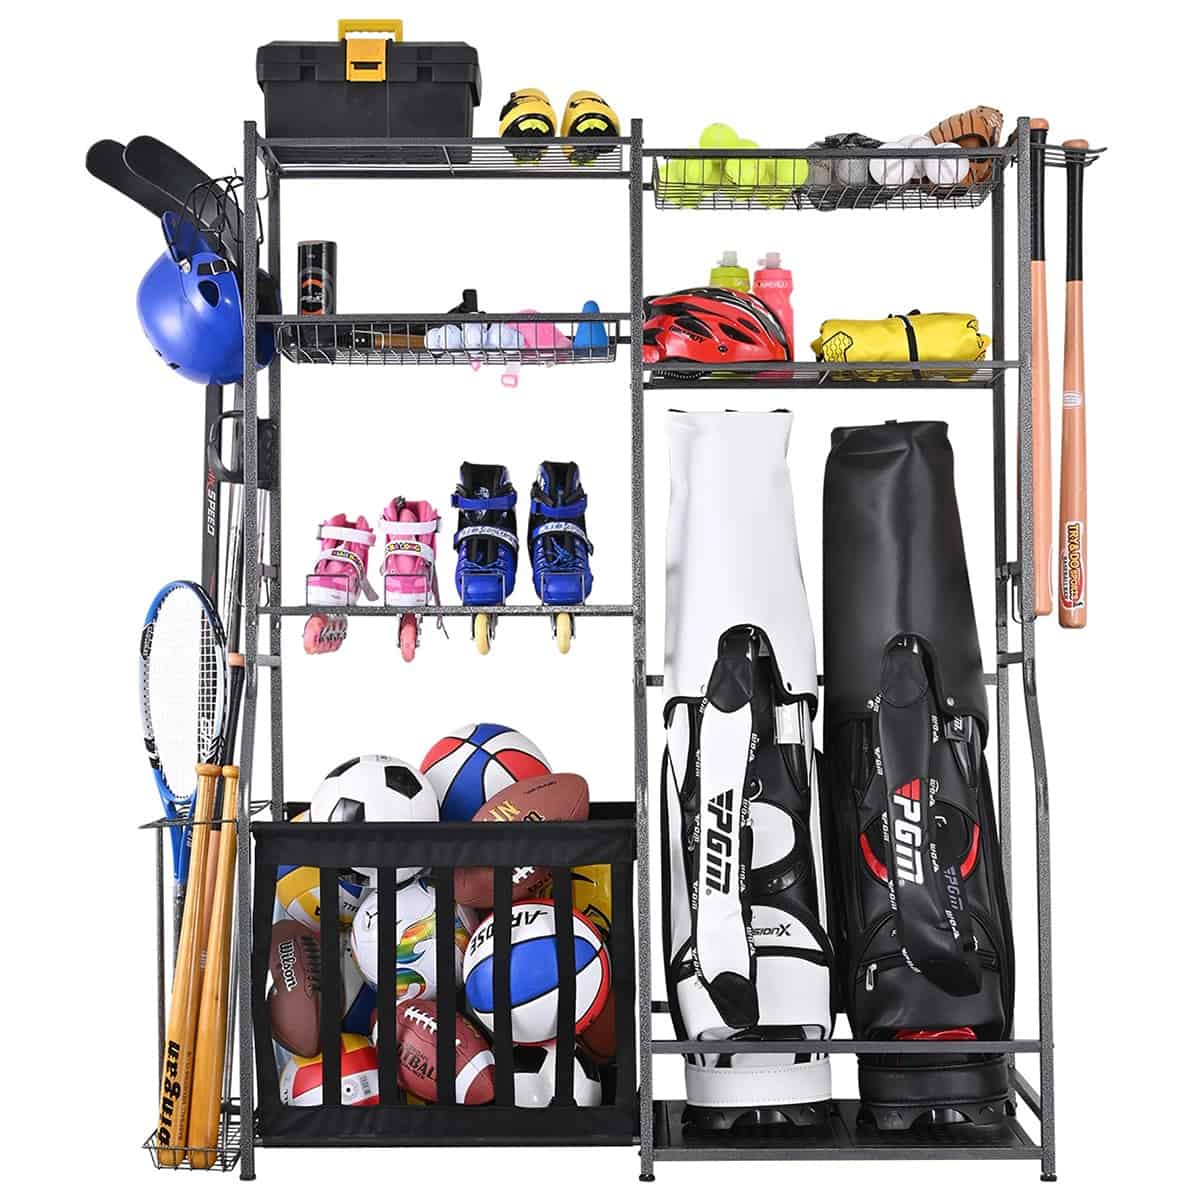 Large sports equipment and ball storage rack that sits against the wall.